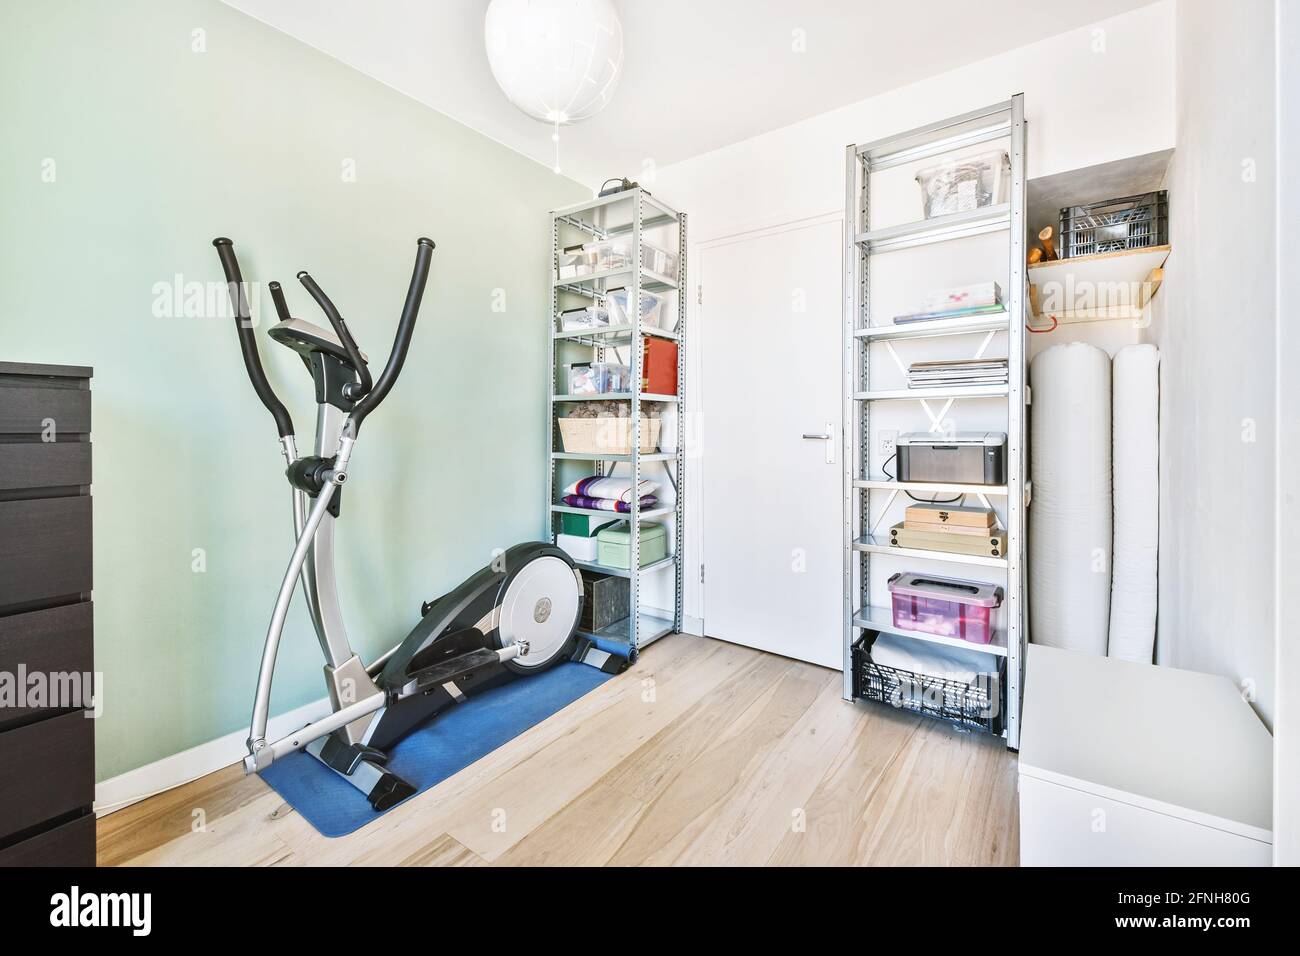 Step machine and shelves in home gym Stock Photo